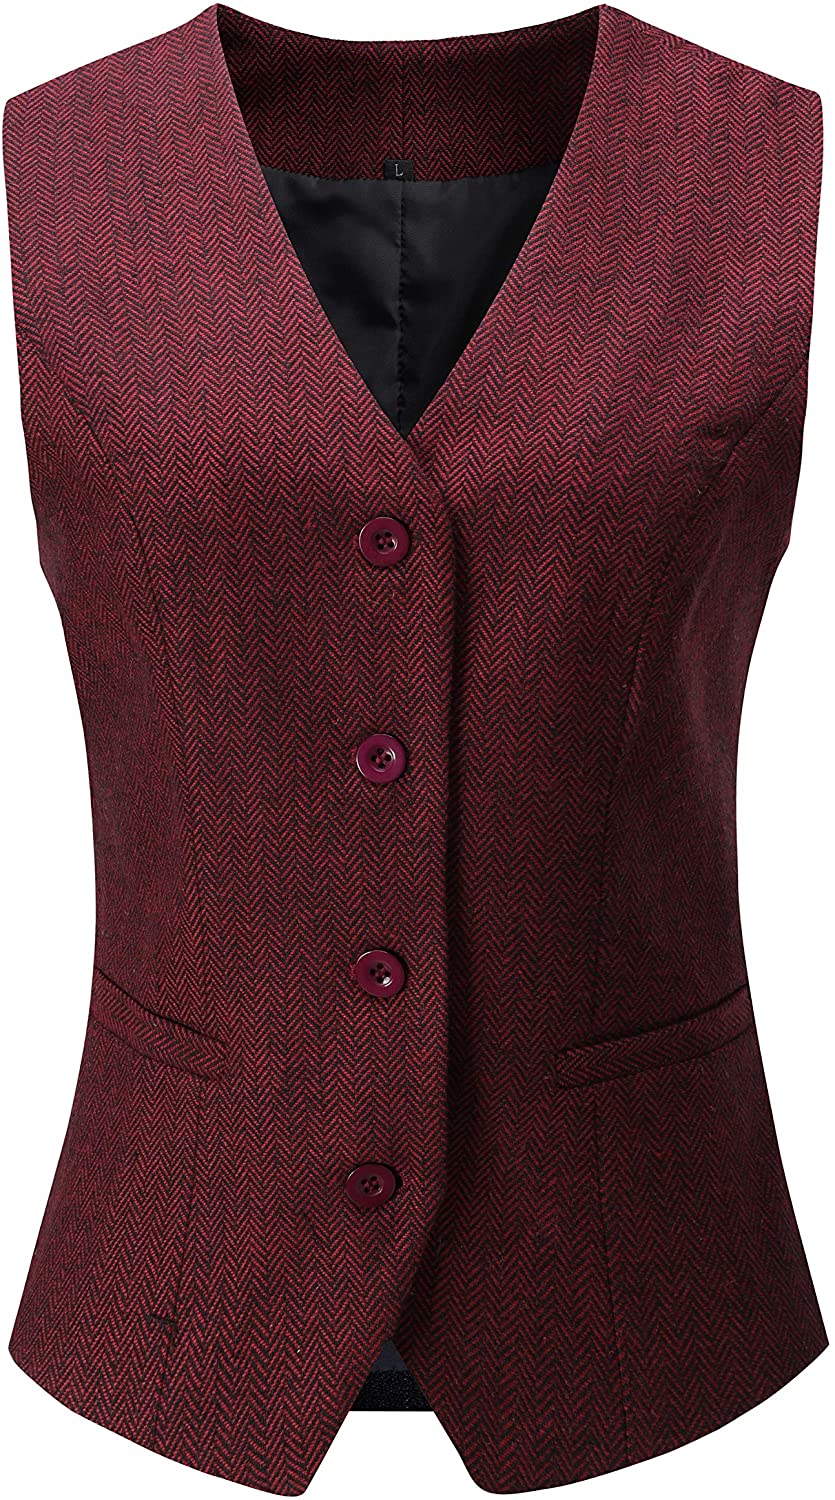 Beyove Womens Waistcoat Fully Lined 4 Button V-Neck Economy Dressy Suit Formal Business Vest 